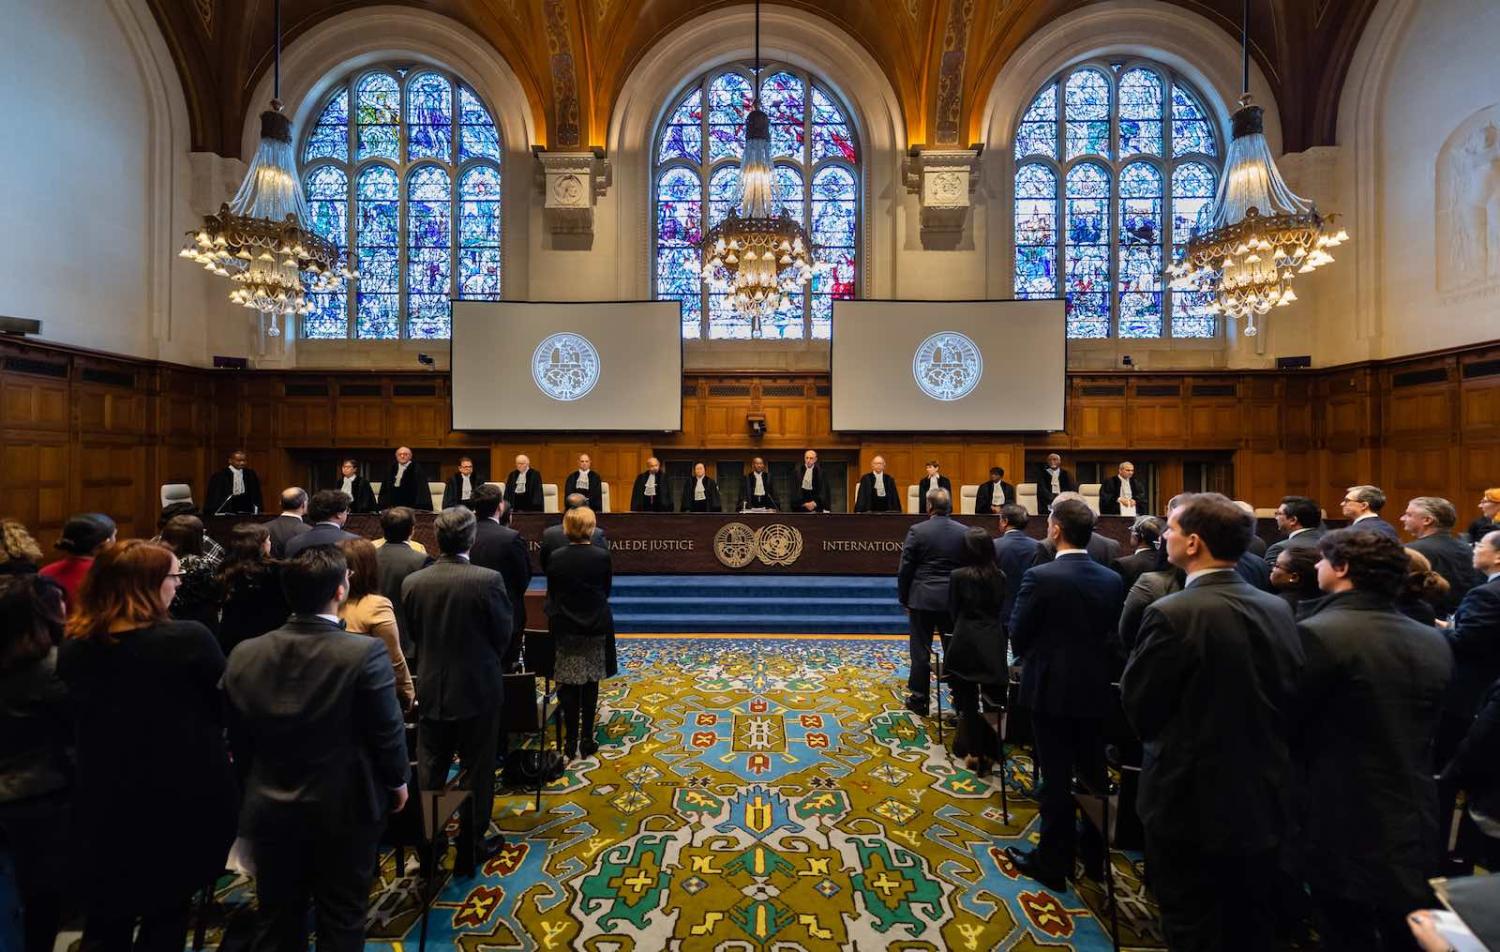 The International Court of Justice delivers its Advisory Opinion on the 1965 Separation of Chagos Archipelago from Mauritius, The Hague, 25 February 2019 (Wendy van Bree/UN Photo) 